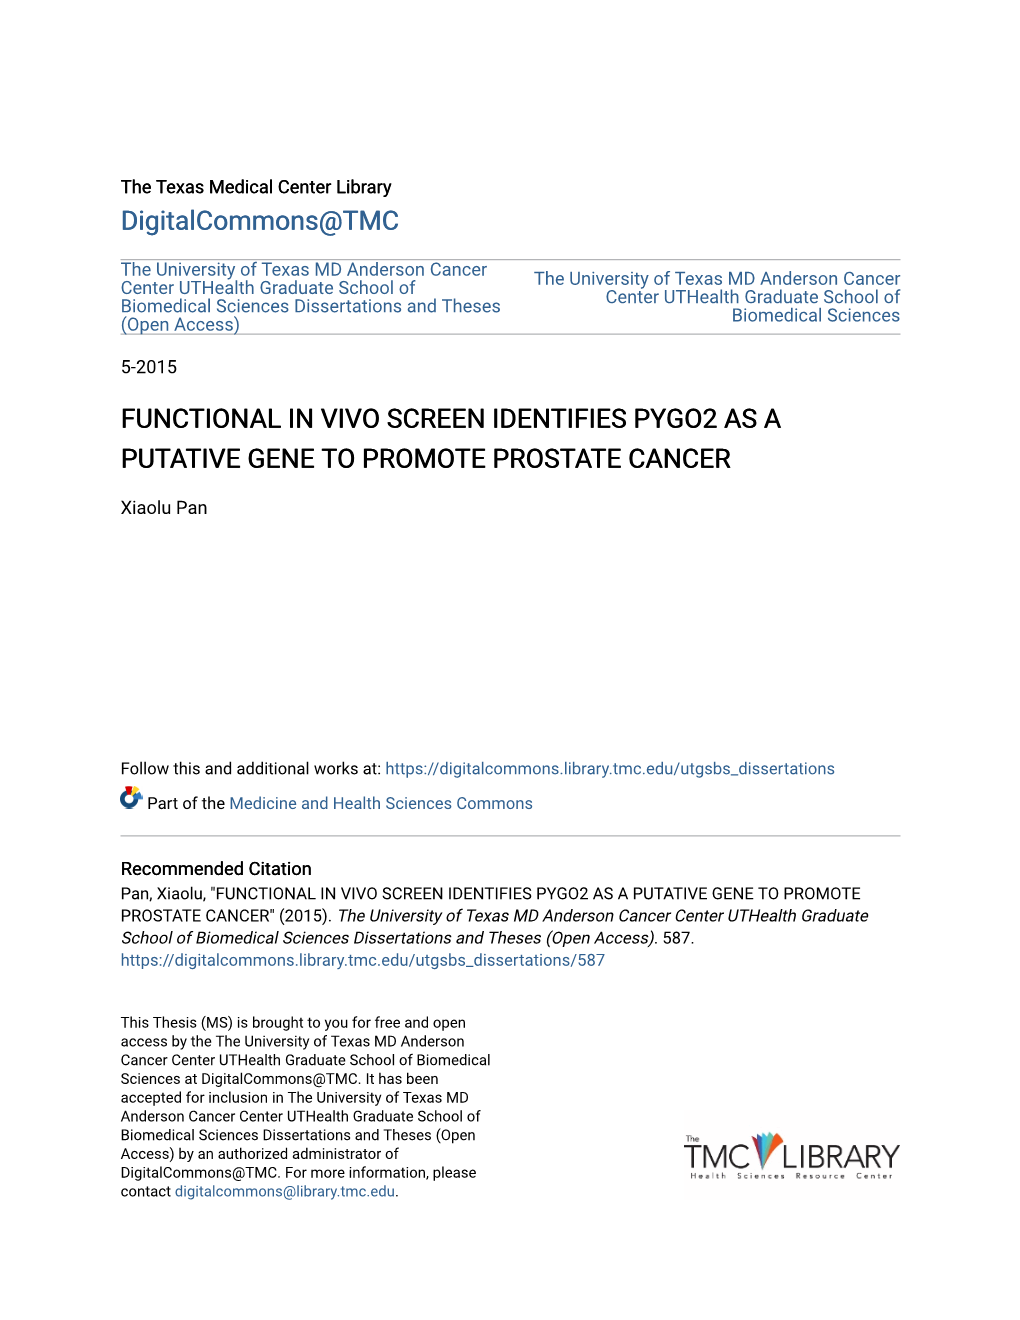 Functional in Vivo Screen Identifies Pygo2 As a Putative Gene to Promote Prostate Cancer